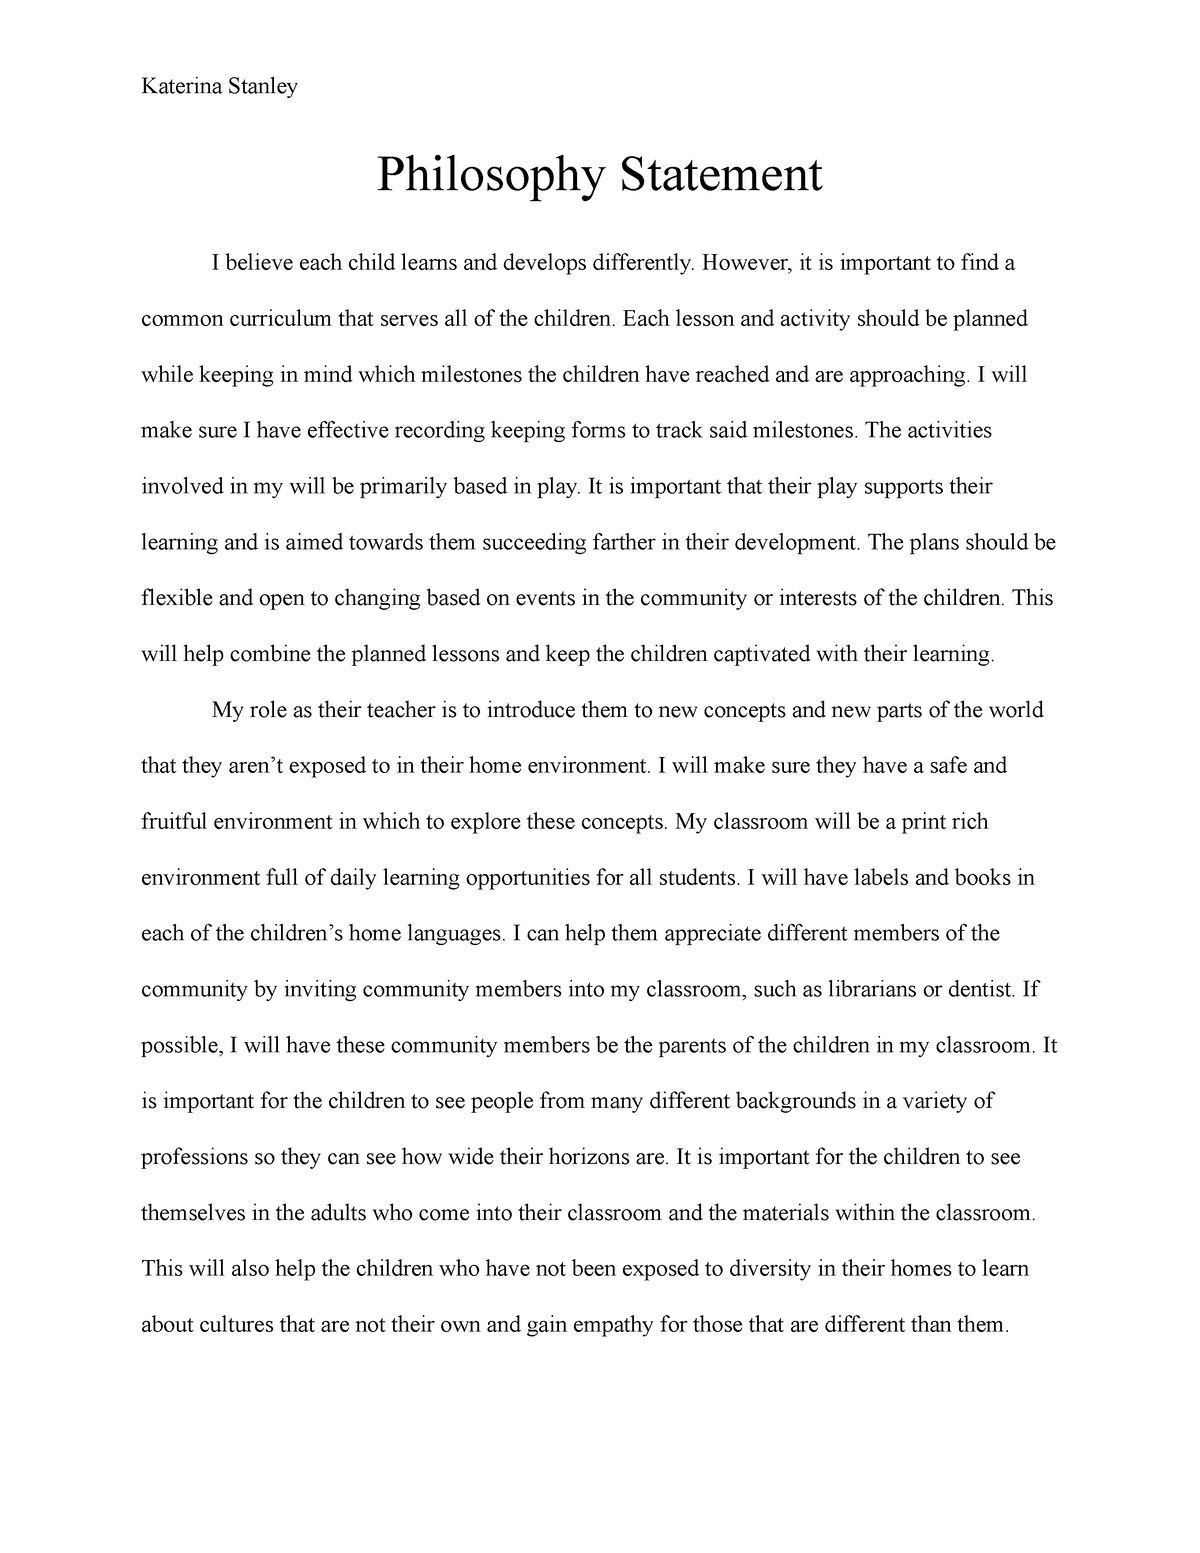 student room philosophy personal statement